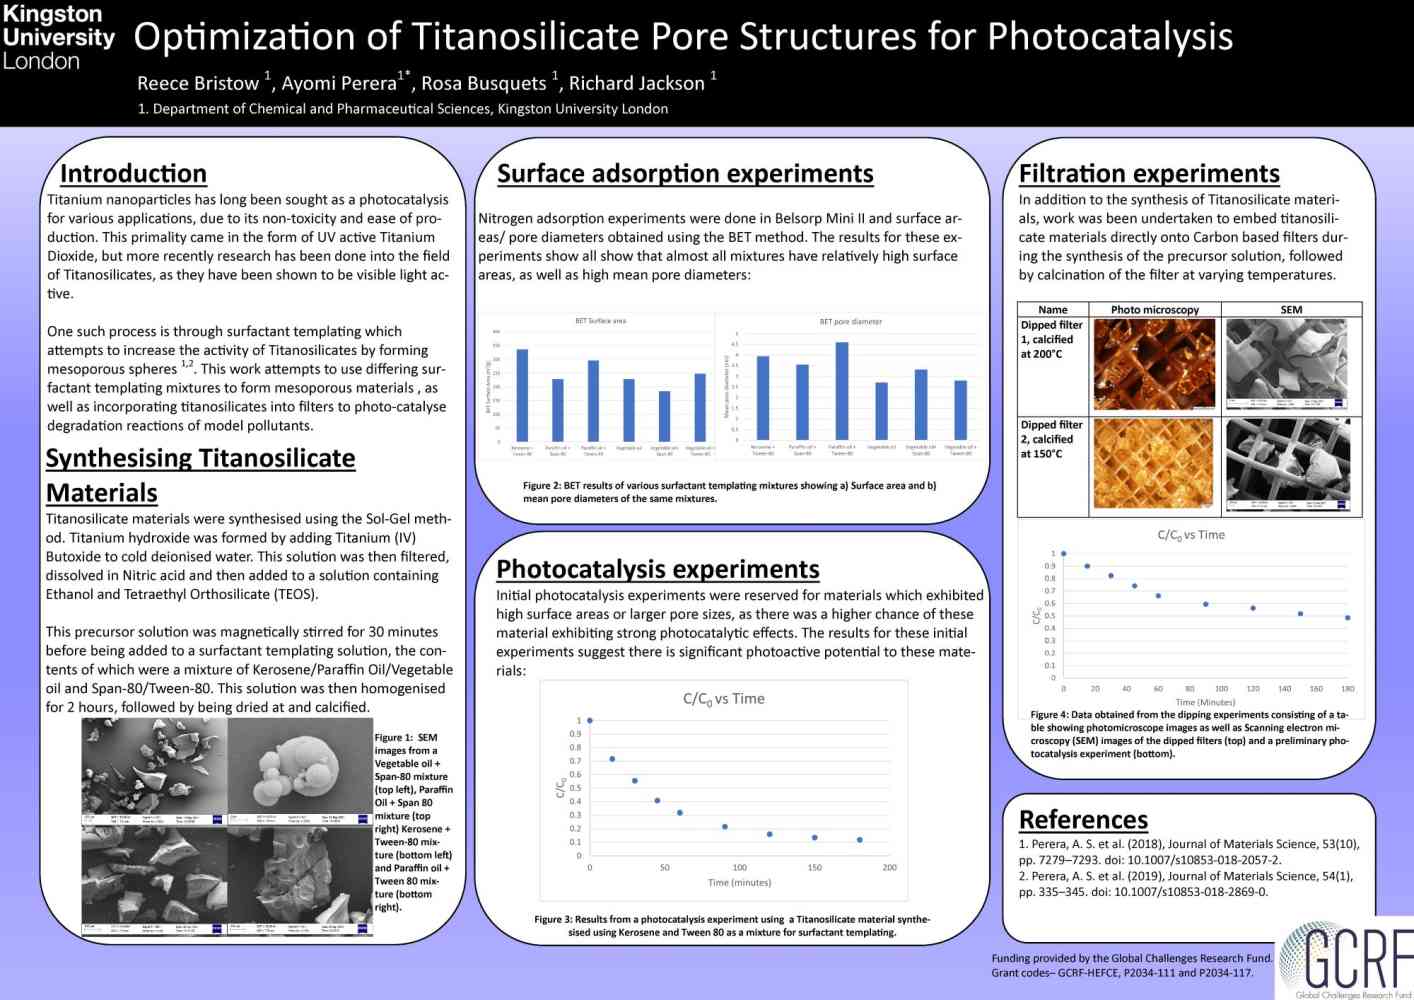 PhD student Reece Bristow presents at KU SEC Research conference 2021 - Poster title: "Optimization of Titanosilicate Pore Structures for Photocatalysis".